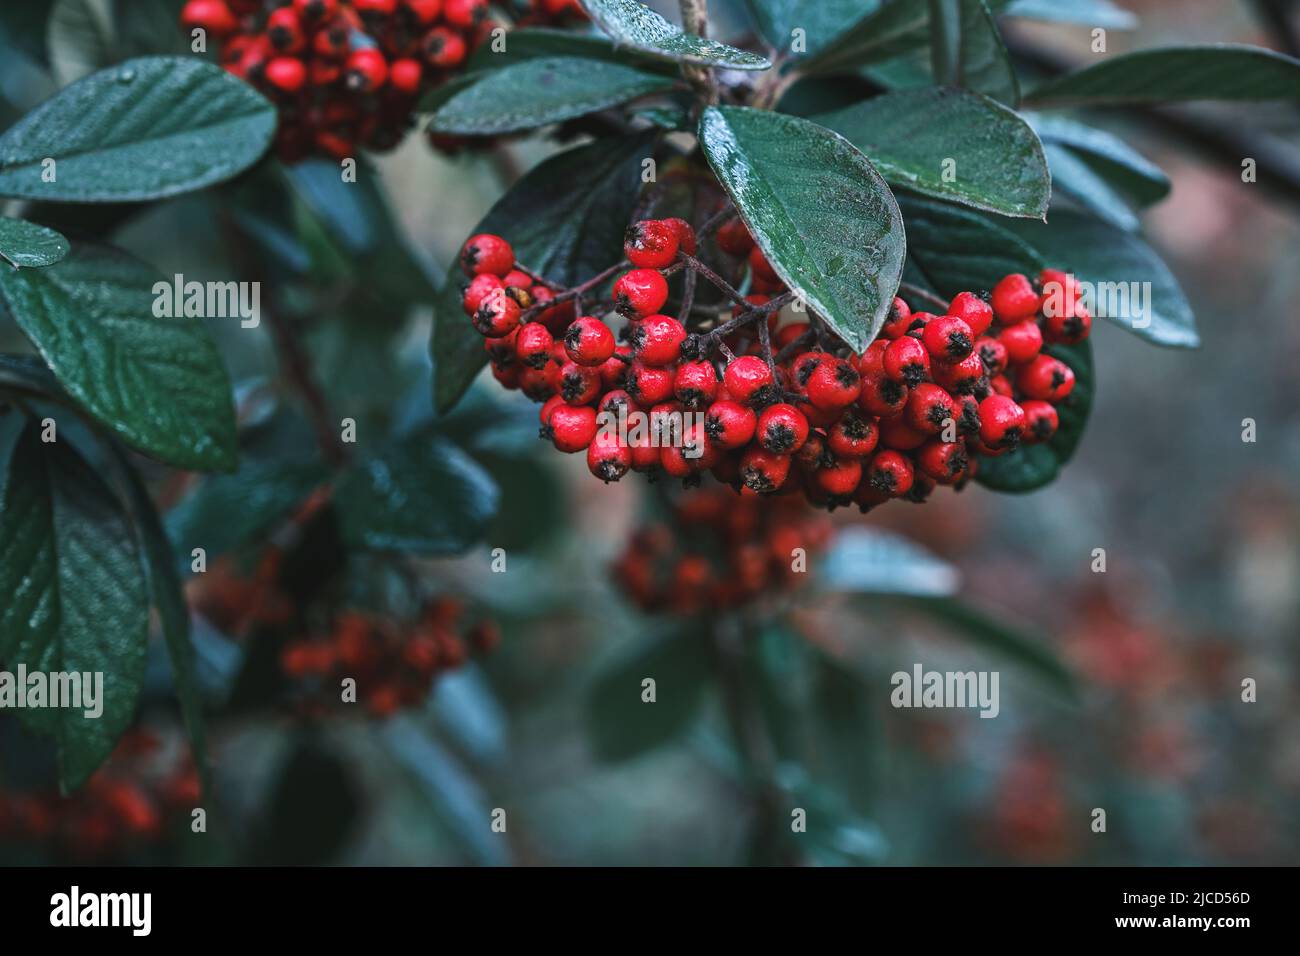 Cotoneaster coriaceus ornamental plant with red fruits and dark green foliage Stock Photo